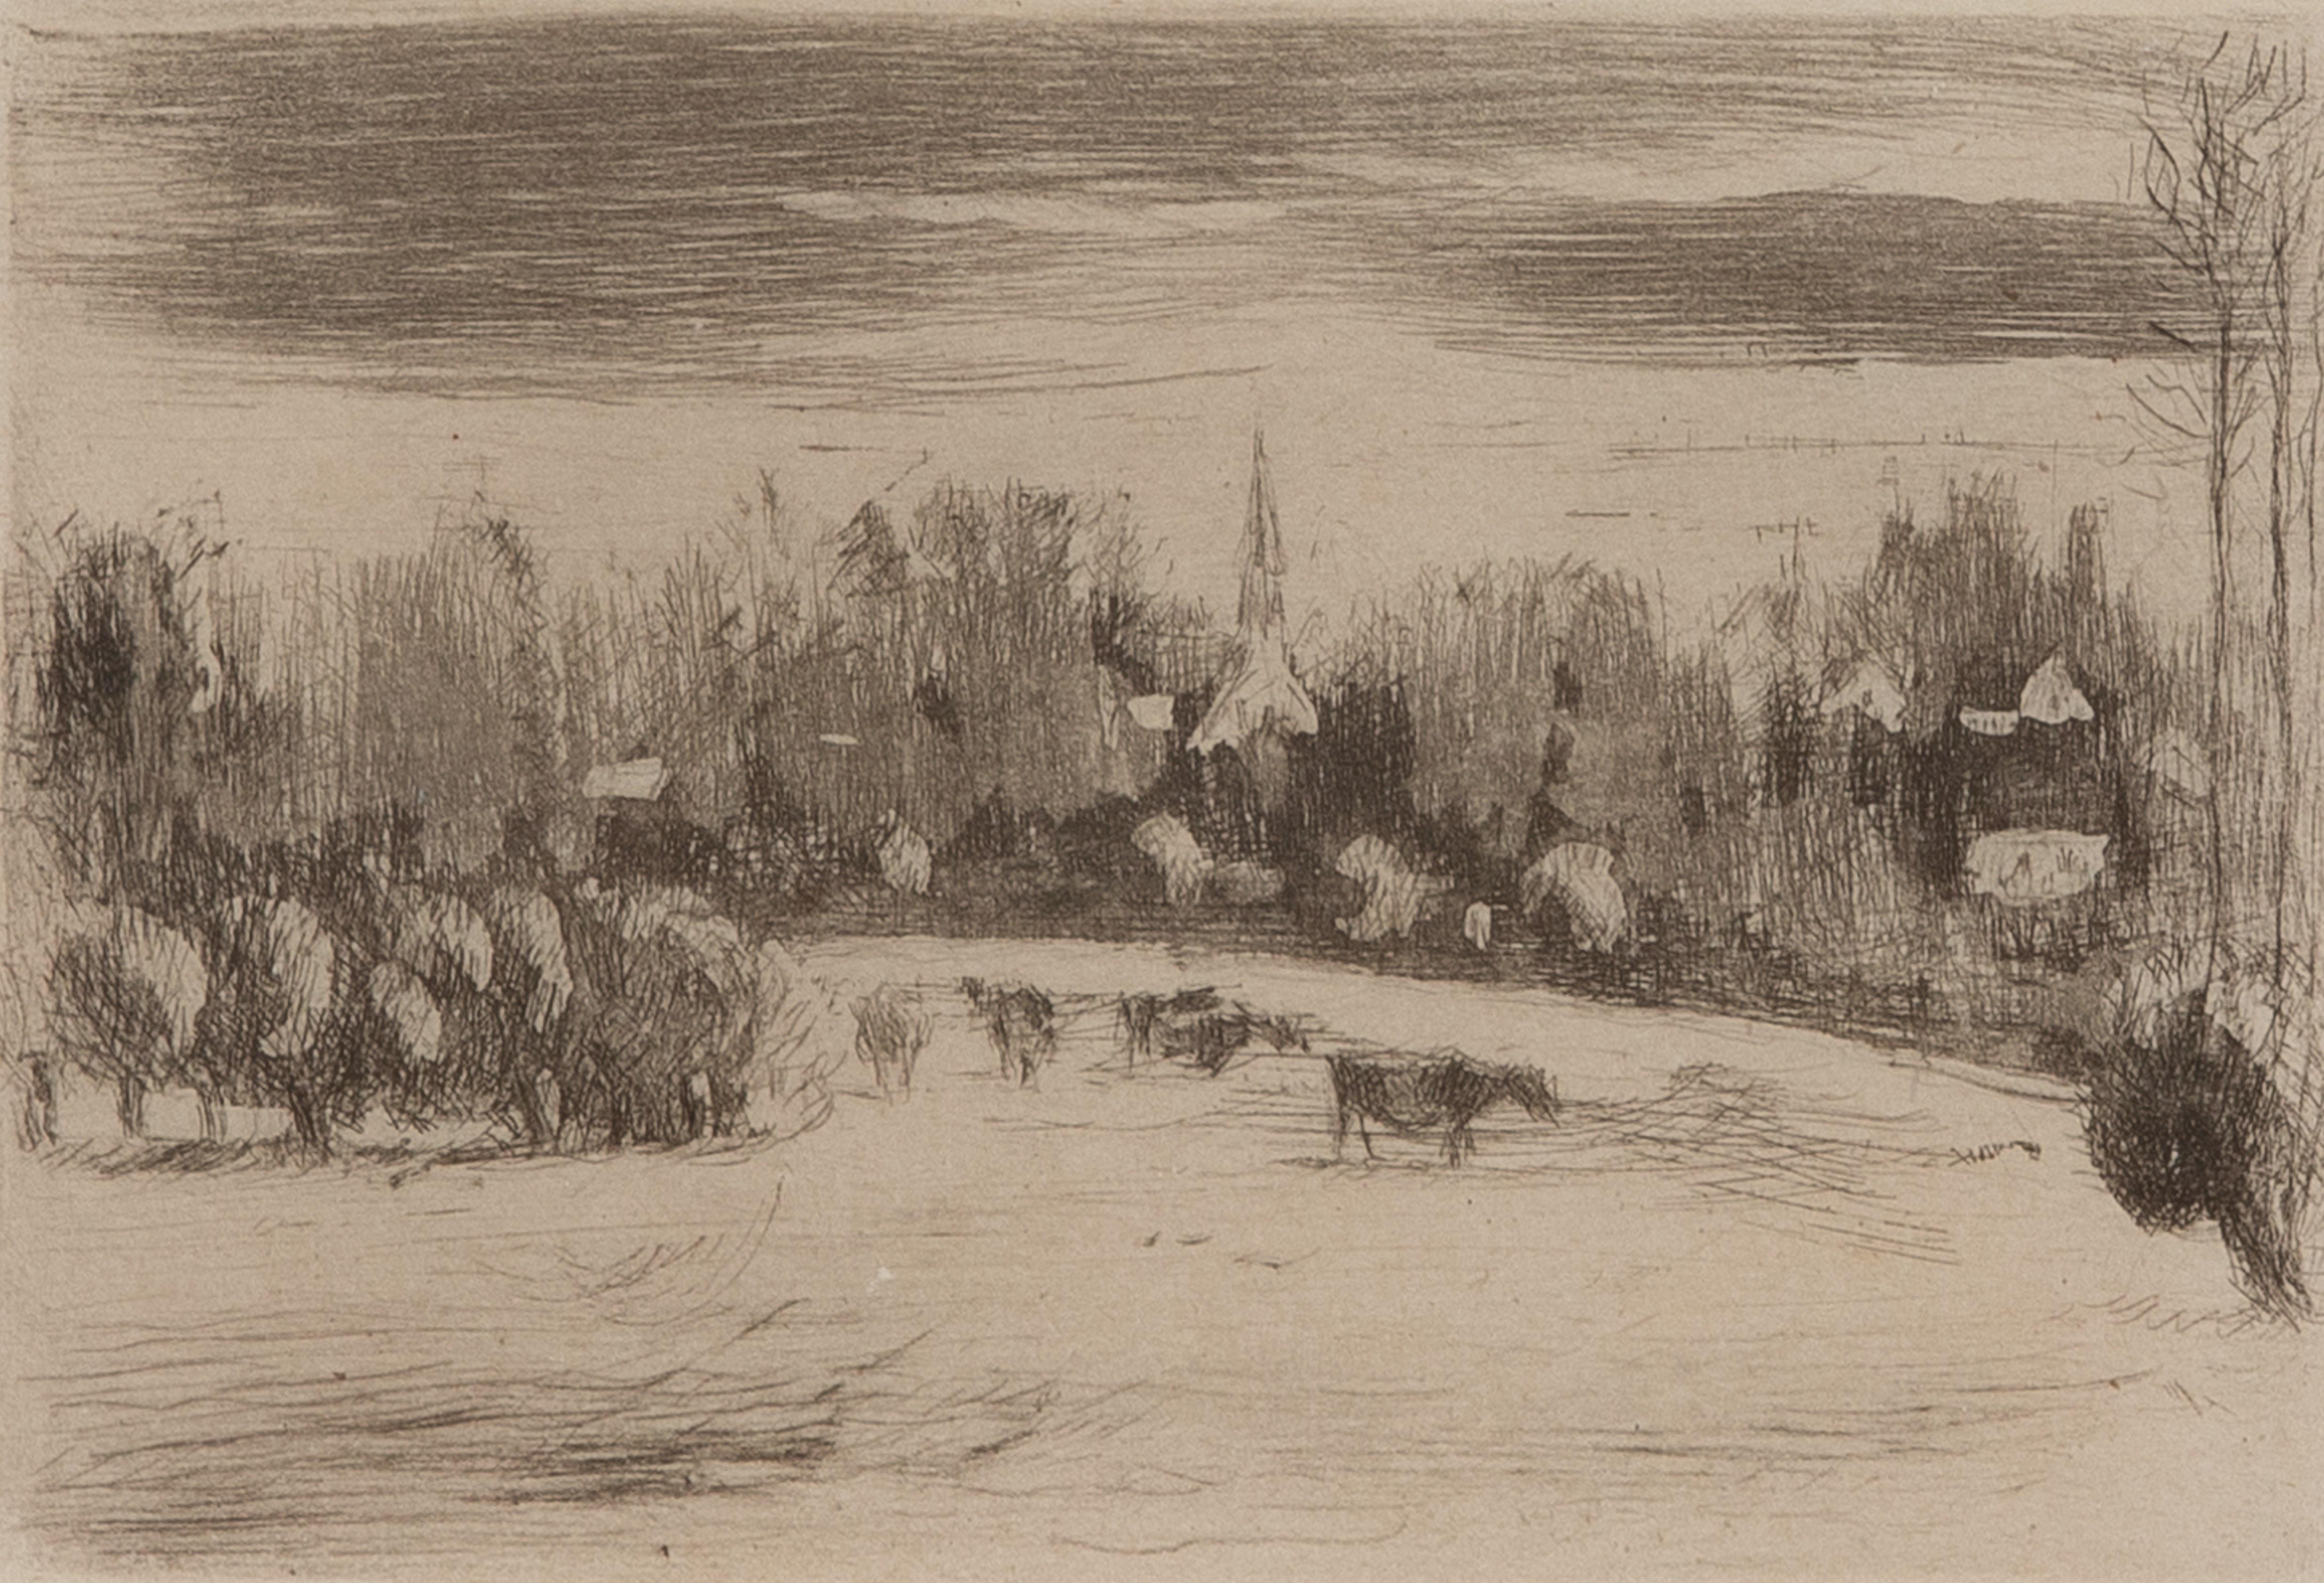 Prairies de Bazincourt by Camille Pissarro (1830-1903)
Etching and aquatint
8.1 x 12 cm (3 ¹/₄ x 4 ³/₄ inches)
Stamped with initials lower left, C.P. and numbered 3/18 lower right

This work was created in 1888 and printed at a later date as a part